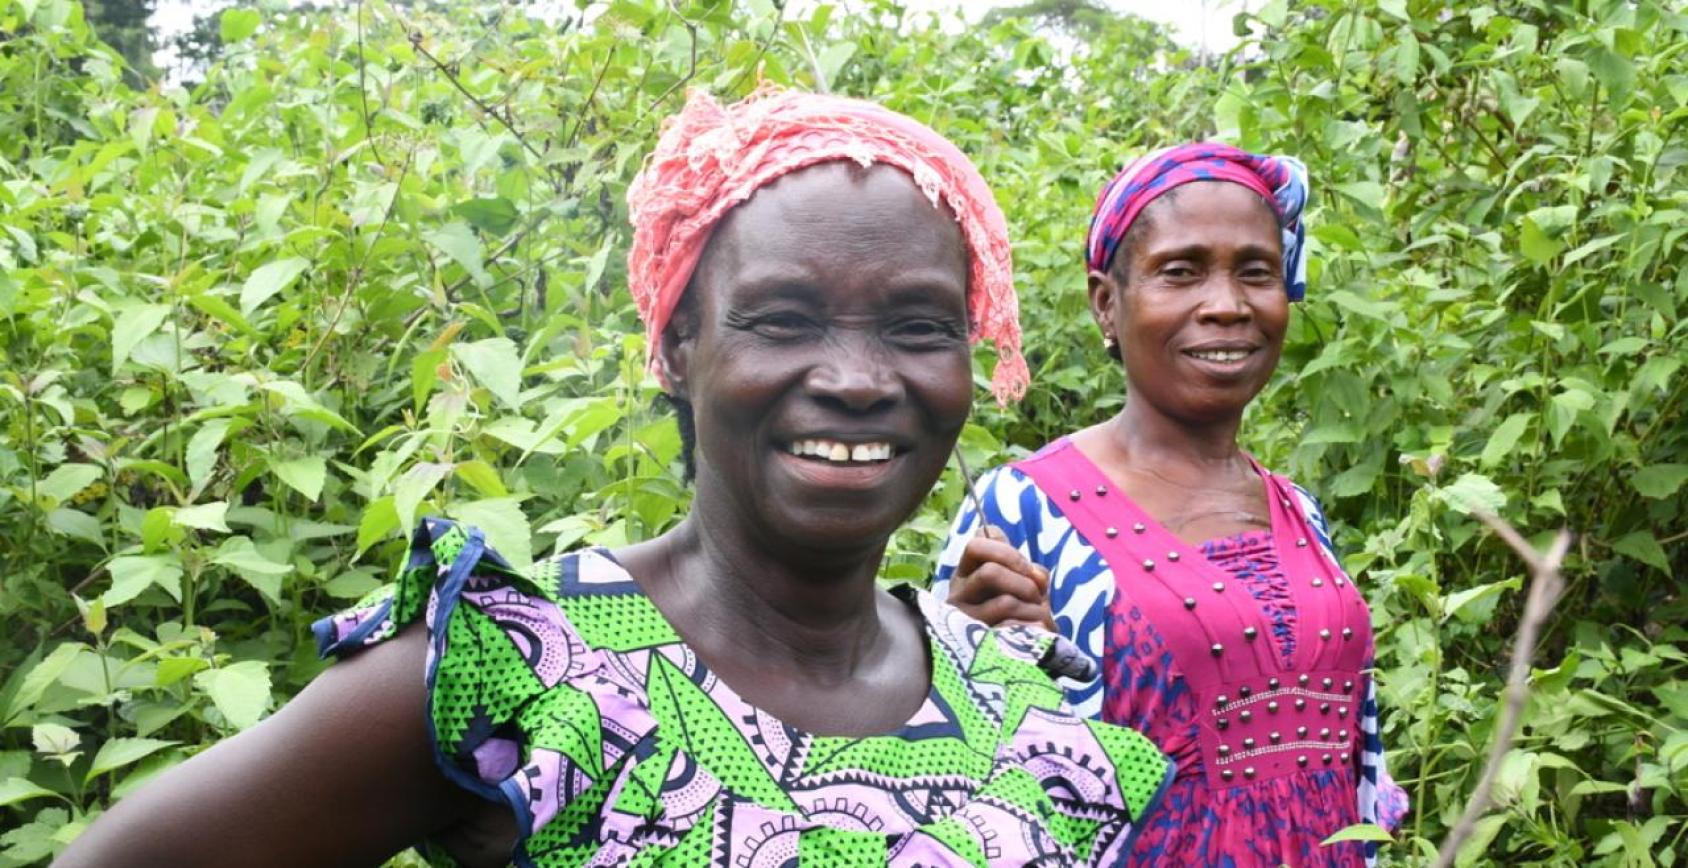 Two Liberian women in brightly coloured clothes stand next to each smiling, in front of green bushes